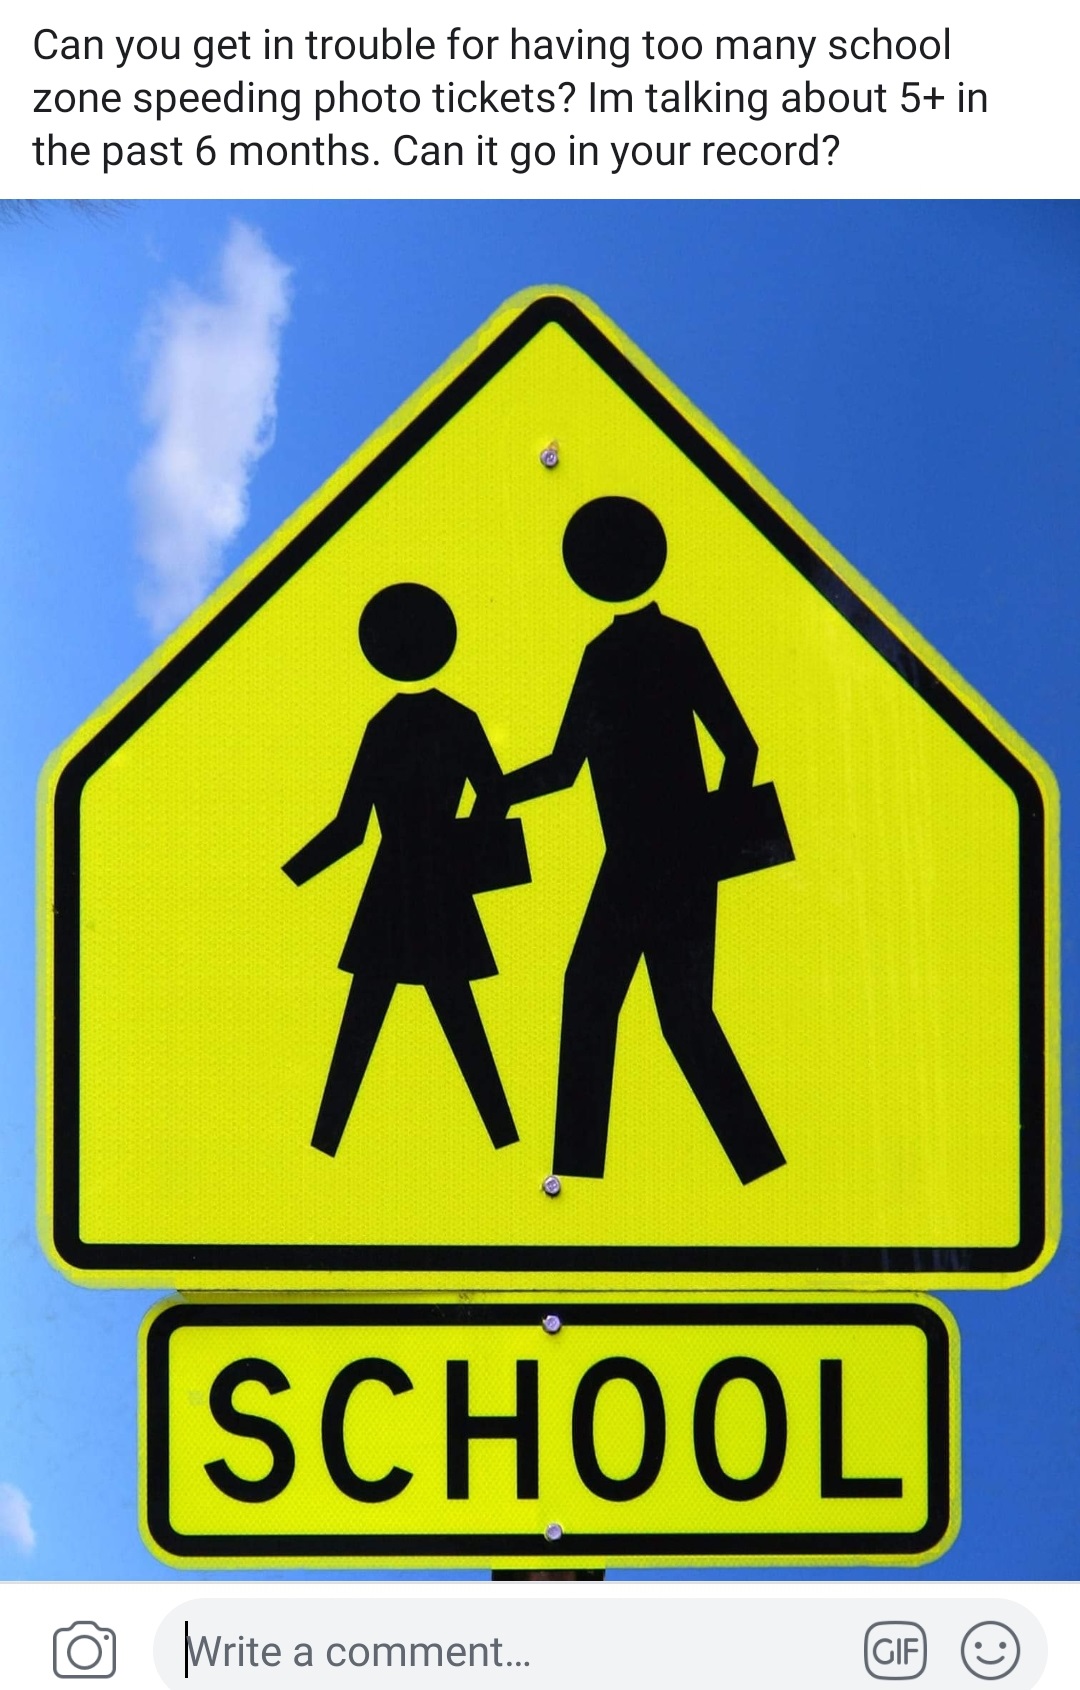 school zone sign - Can you get in trouble for having too many school zone speeding photo tickets? Im talking about 5 in the past 6 months. Can it go in your record? School o Write a comment..